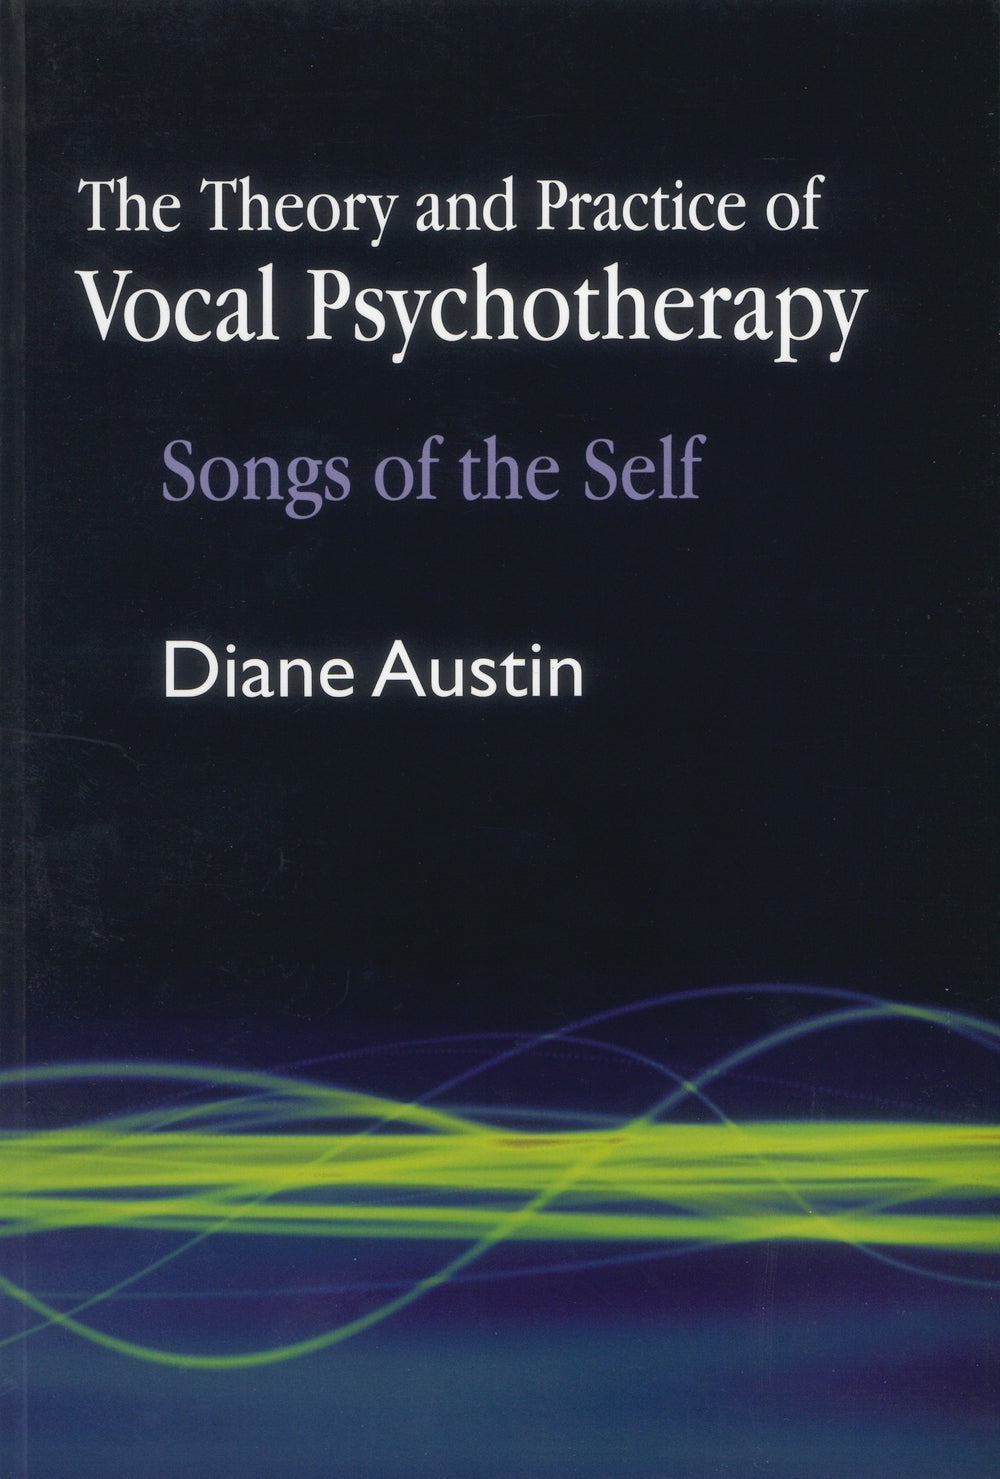 The Theory and Practice of Vocal Psychotherapy by Diane Austin